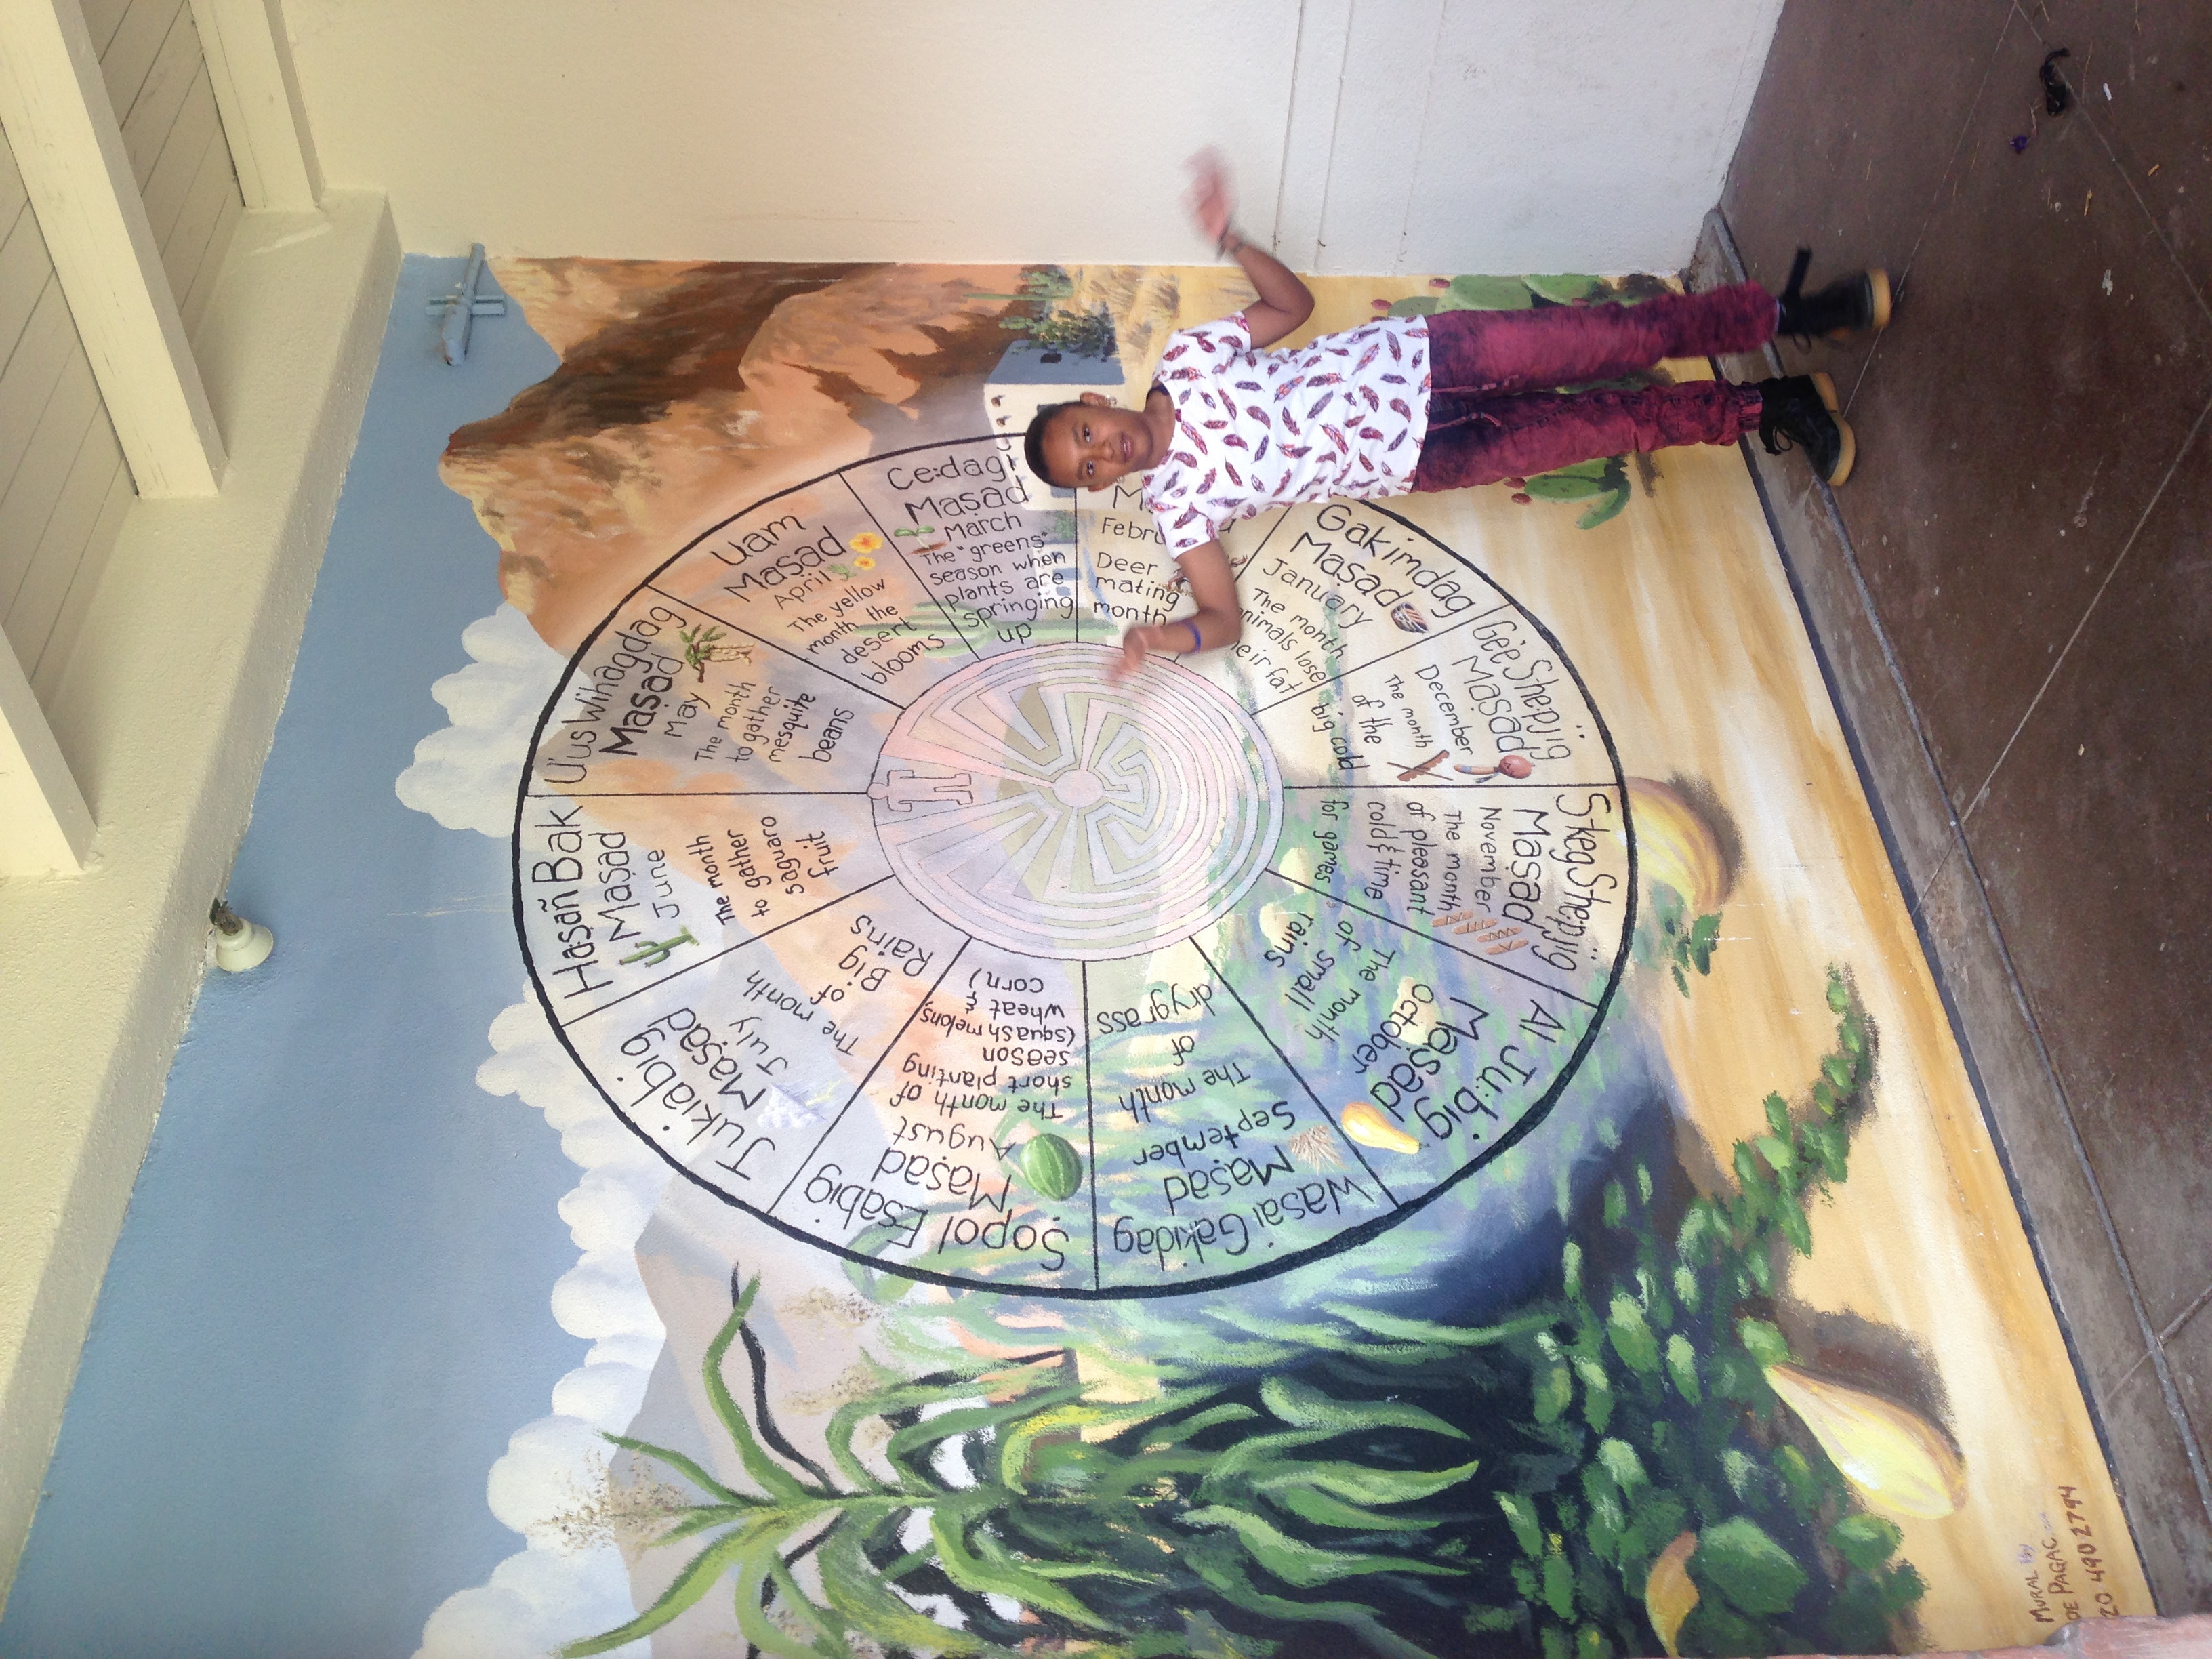 Tohono O'Odham calendar wheel mural at Manzo Elementary School showing seasonal native and cultivated foods, with student explaining mural during tour